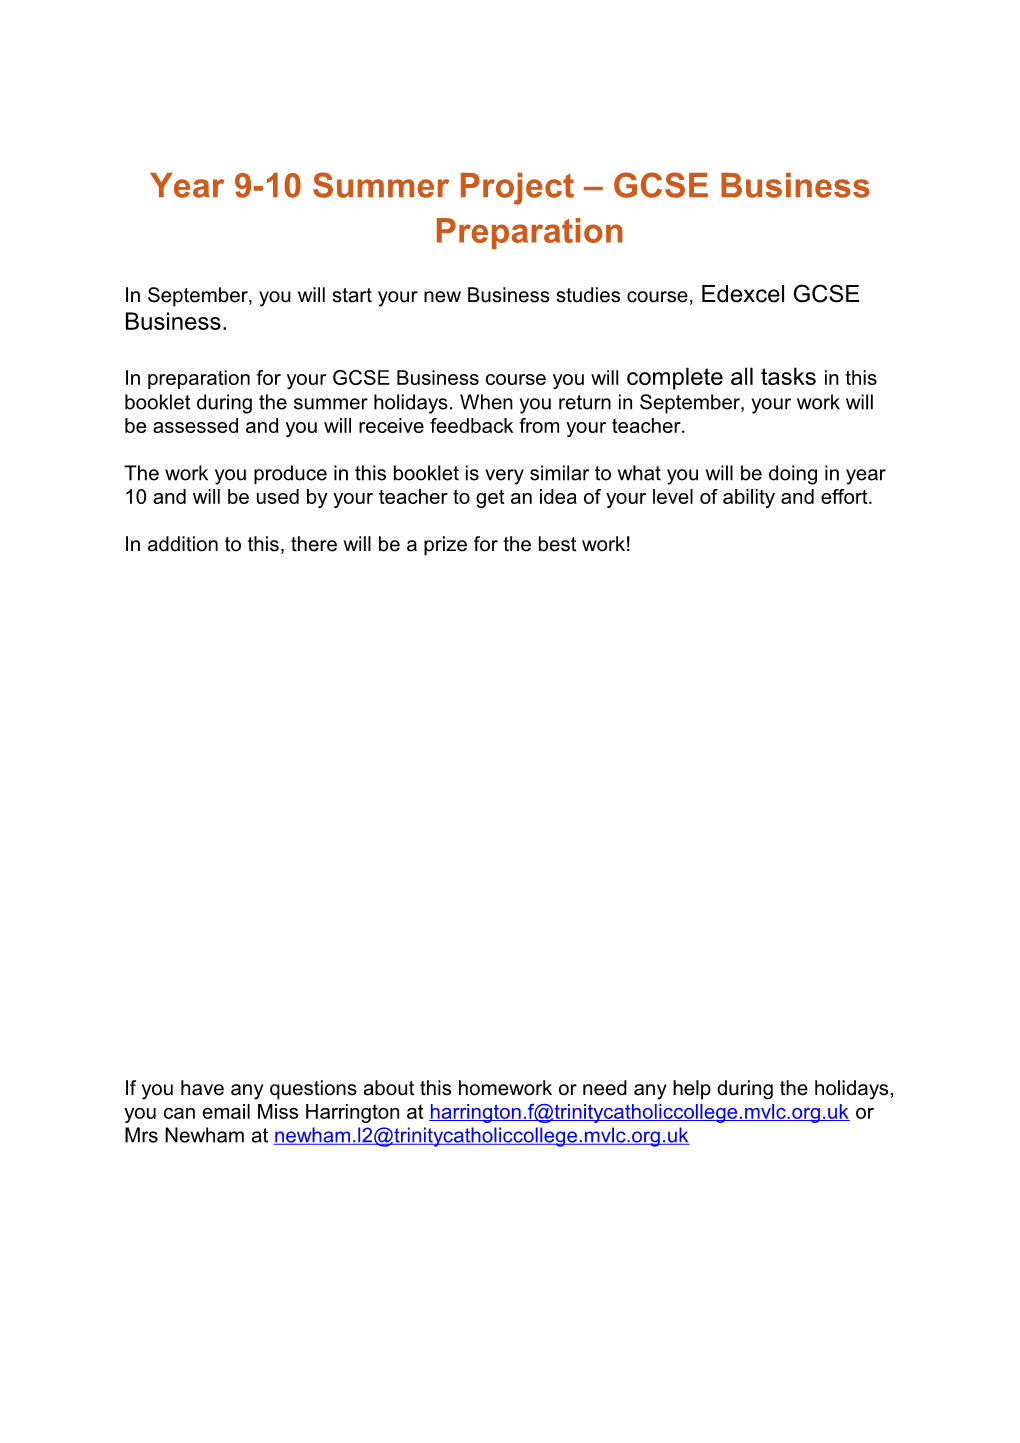 Year 9-10 Summer Project GCSE Business Preparation